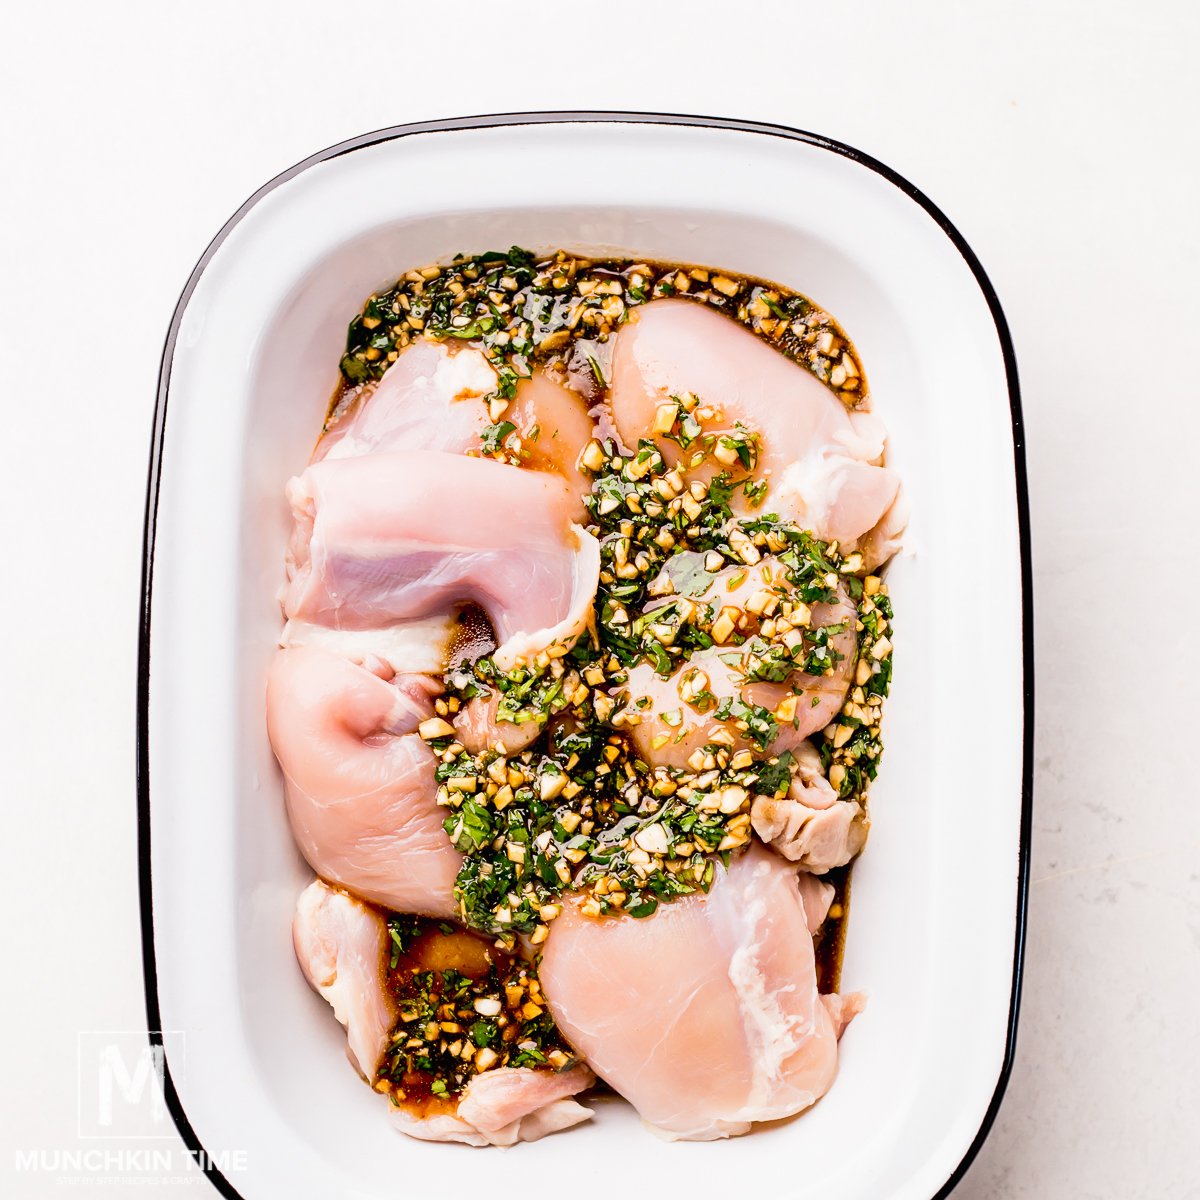 How to marinate chicken thighs